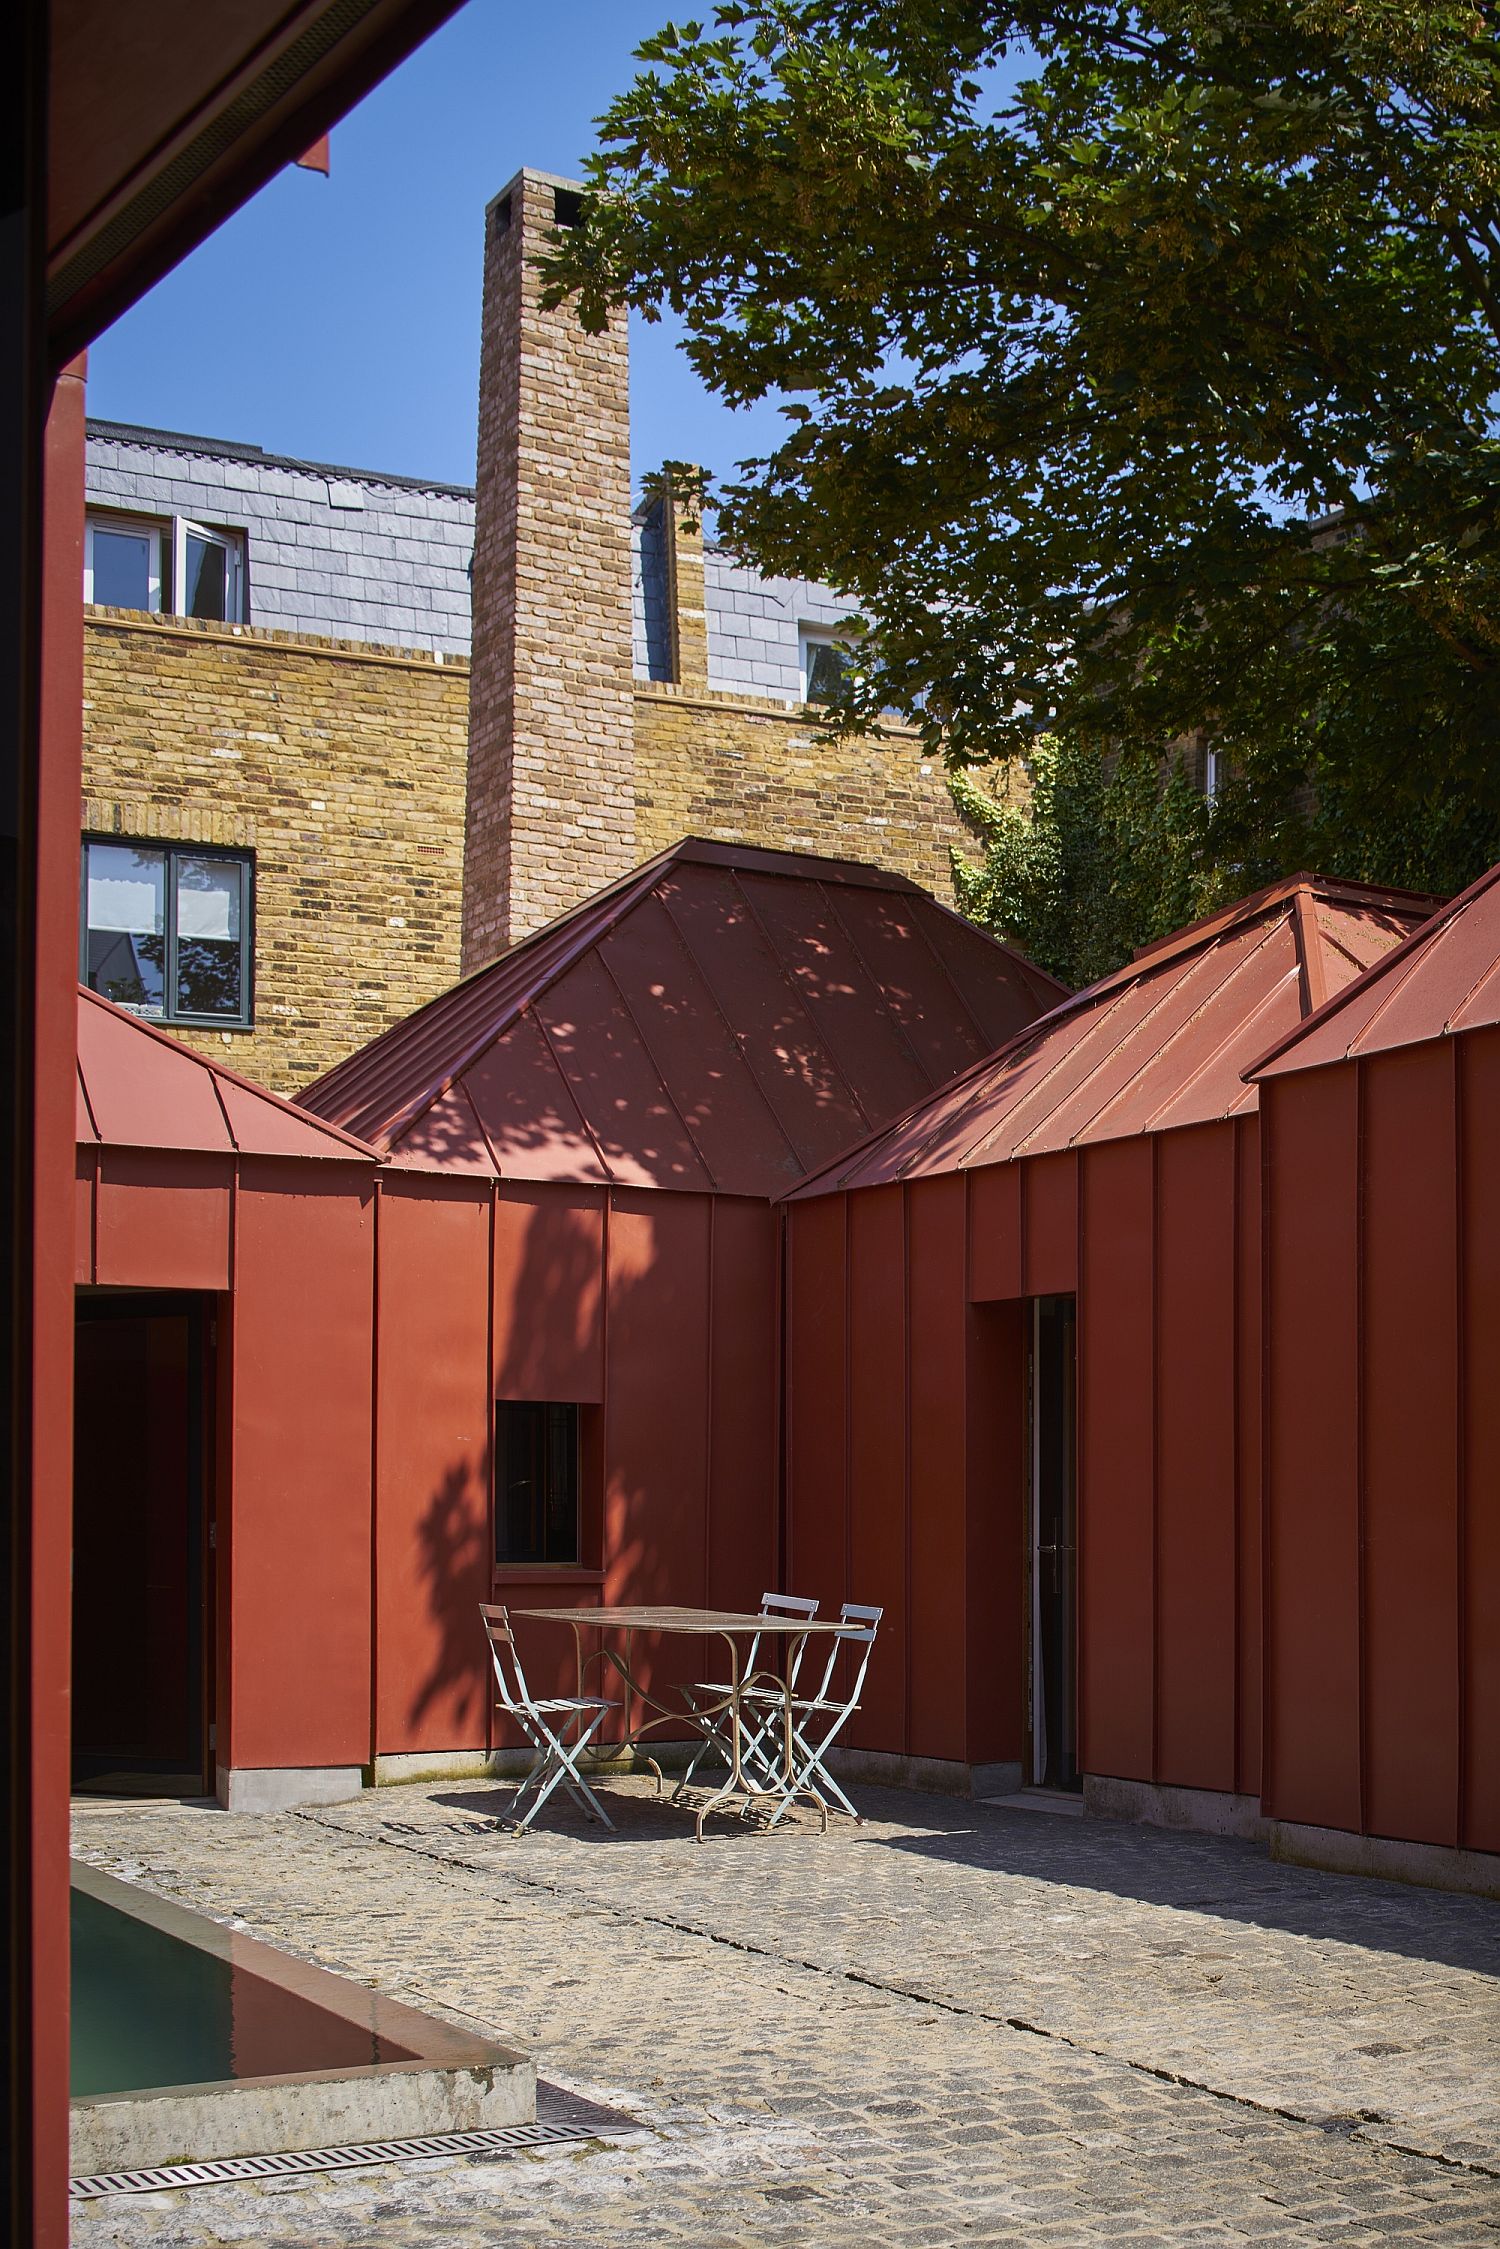 Multiple pavilions in orange metal create a cool courtyard within